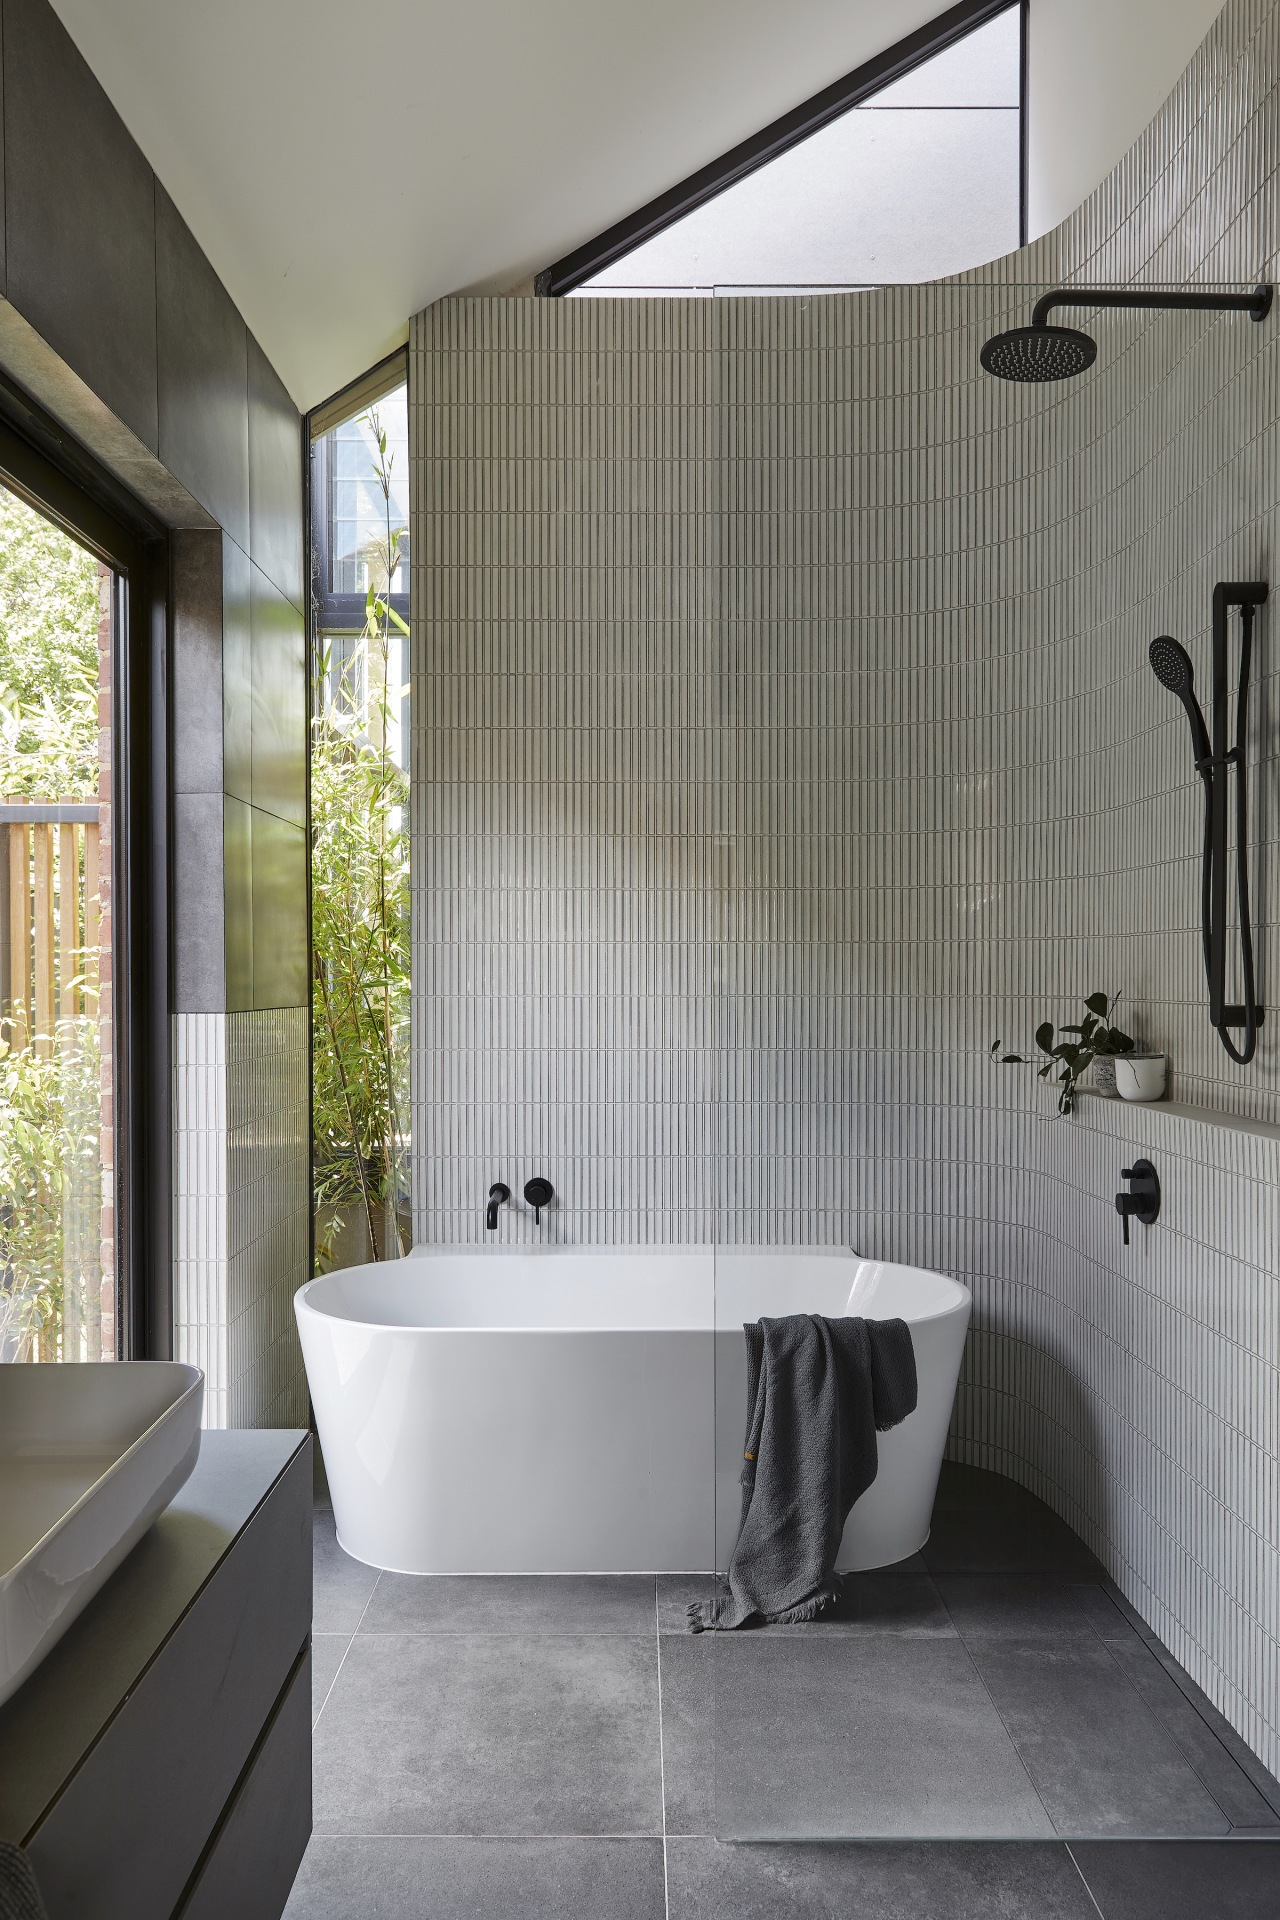 The ensuite takes advantage of the heritage features 